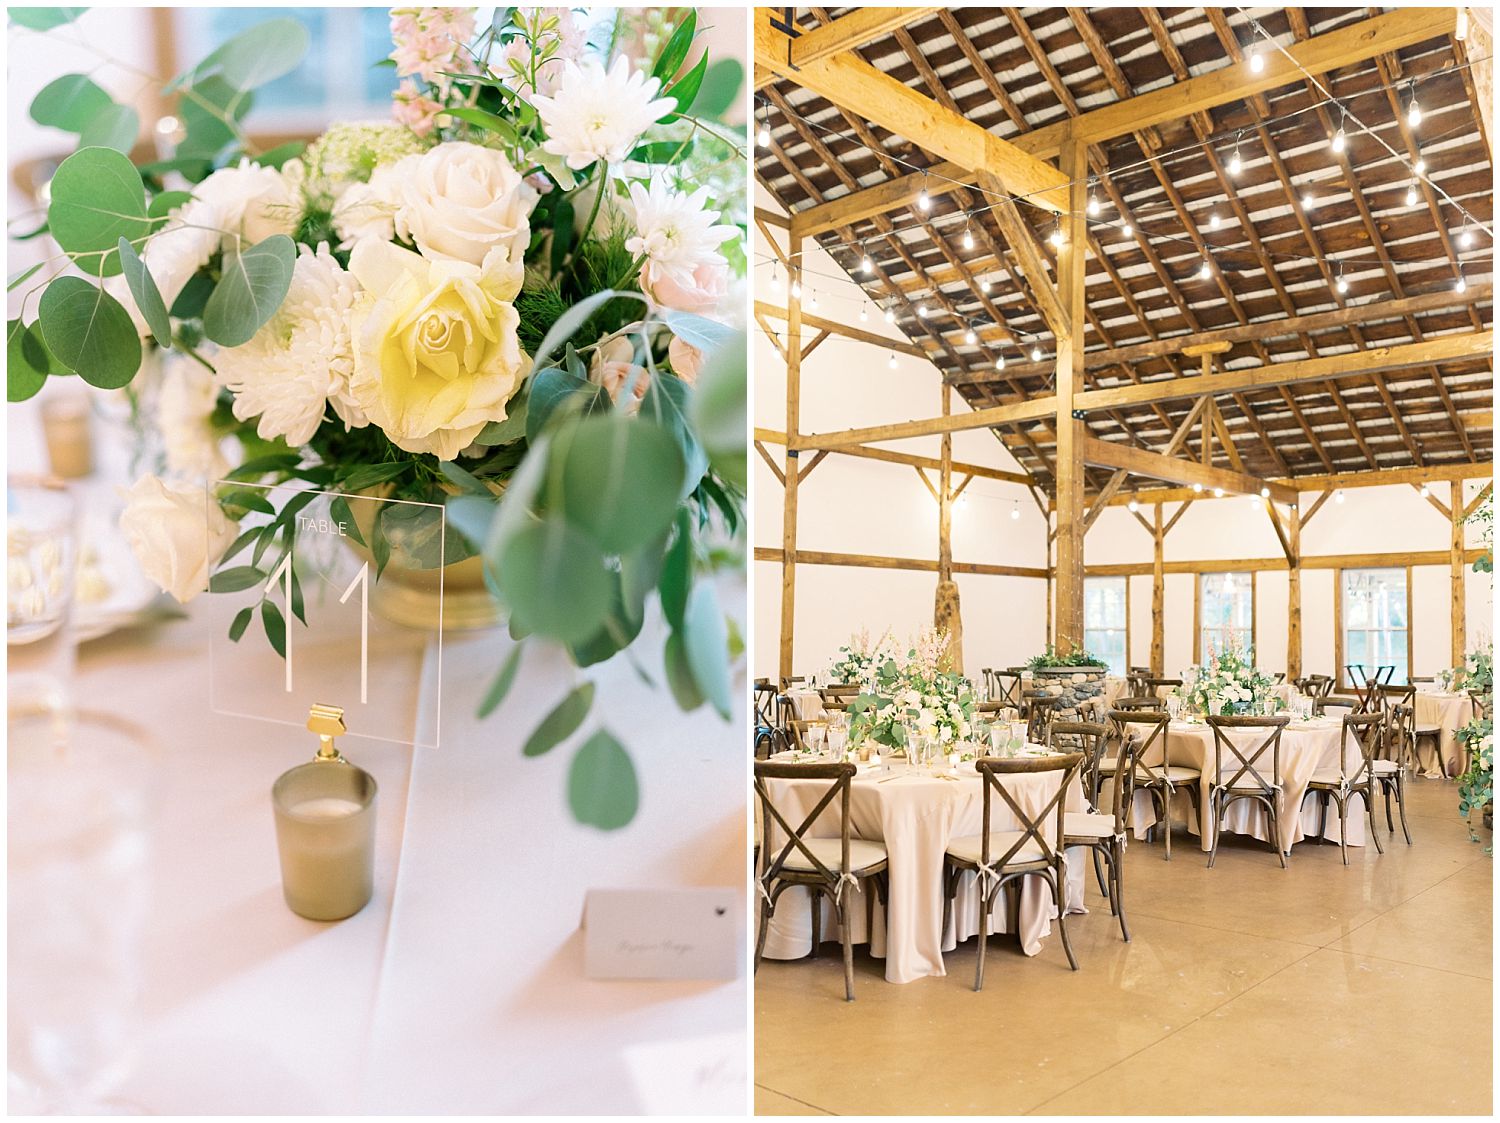 Wedding Reception at Great Marsh Estate stable house